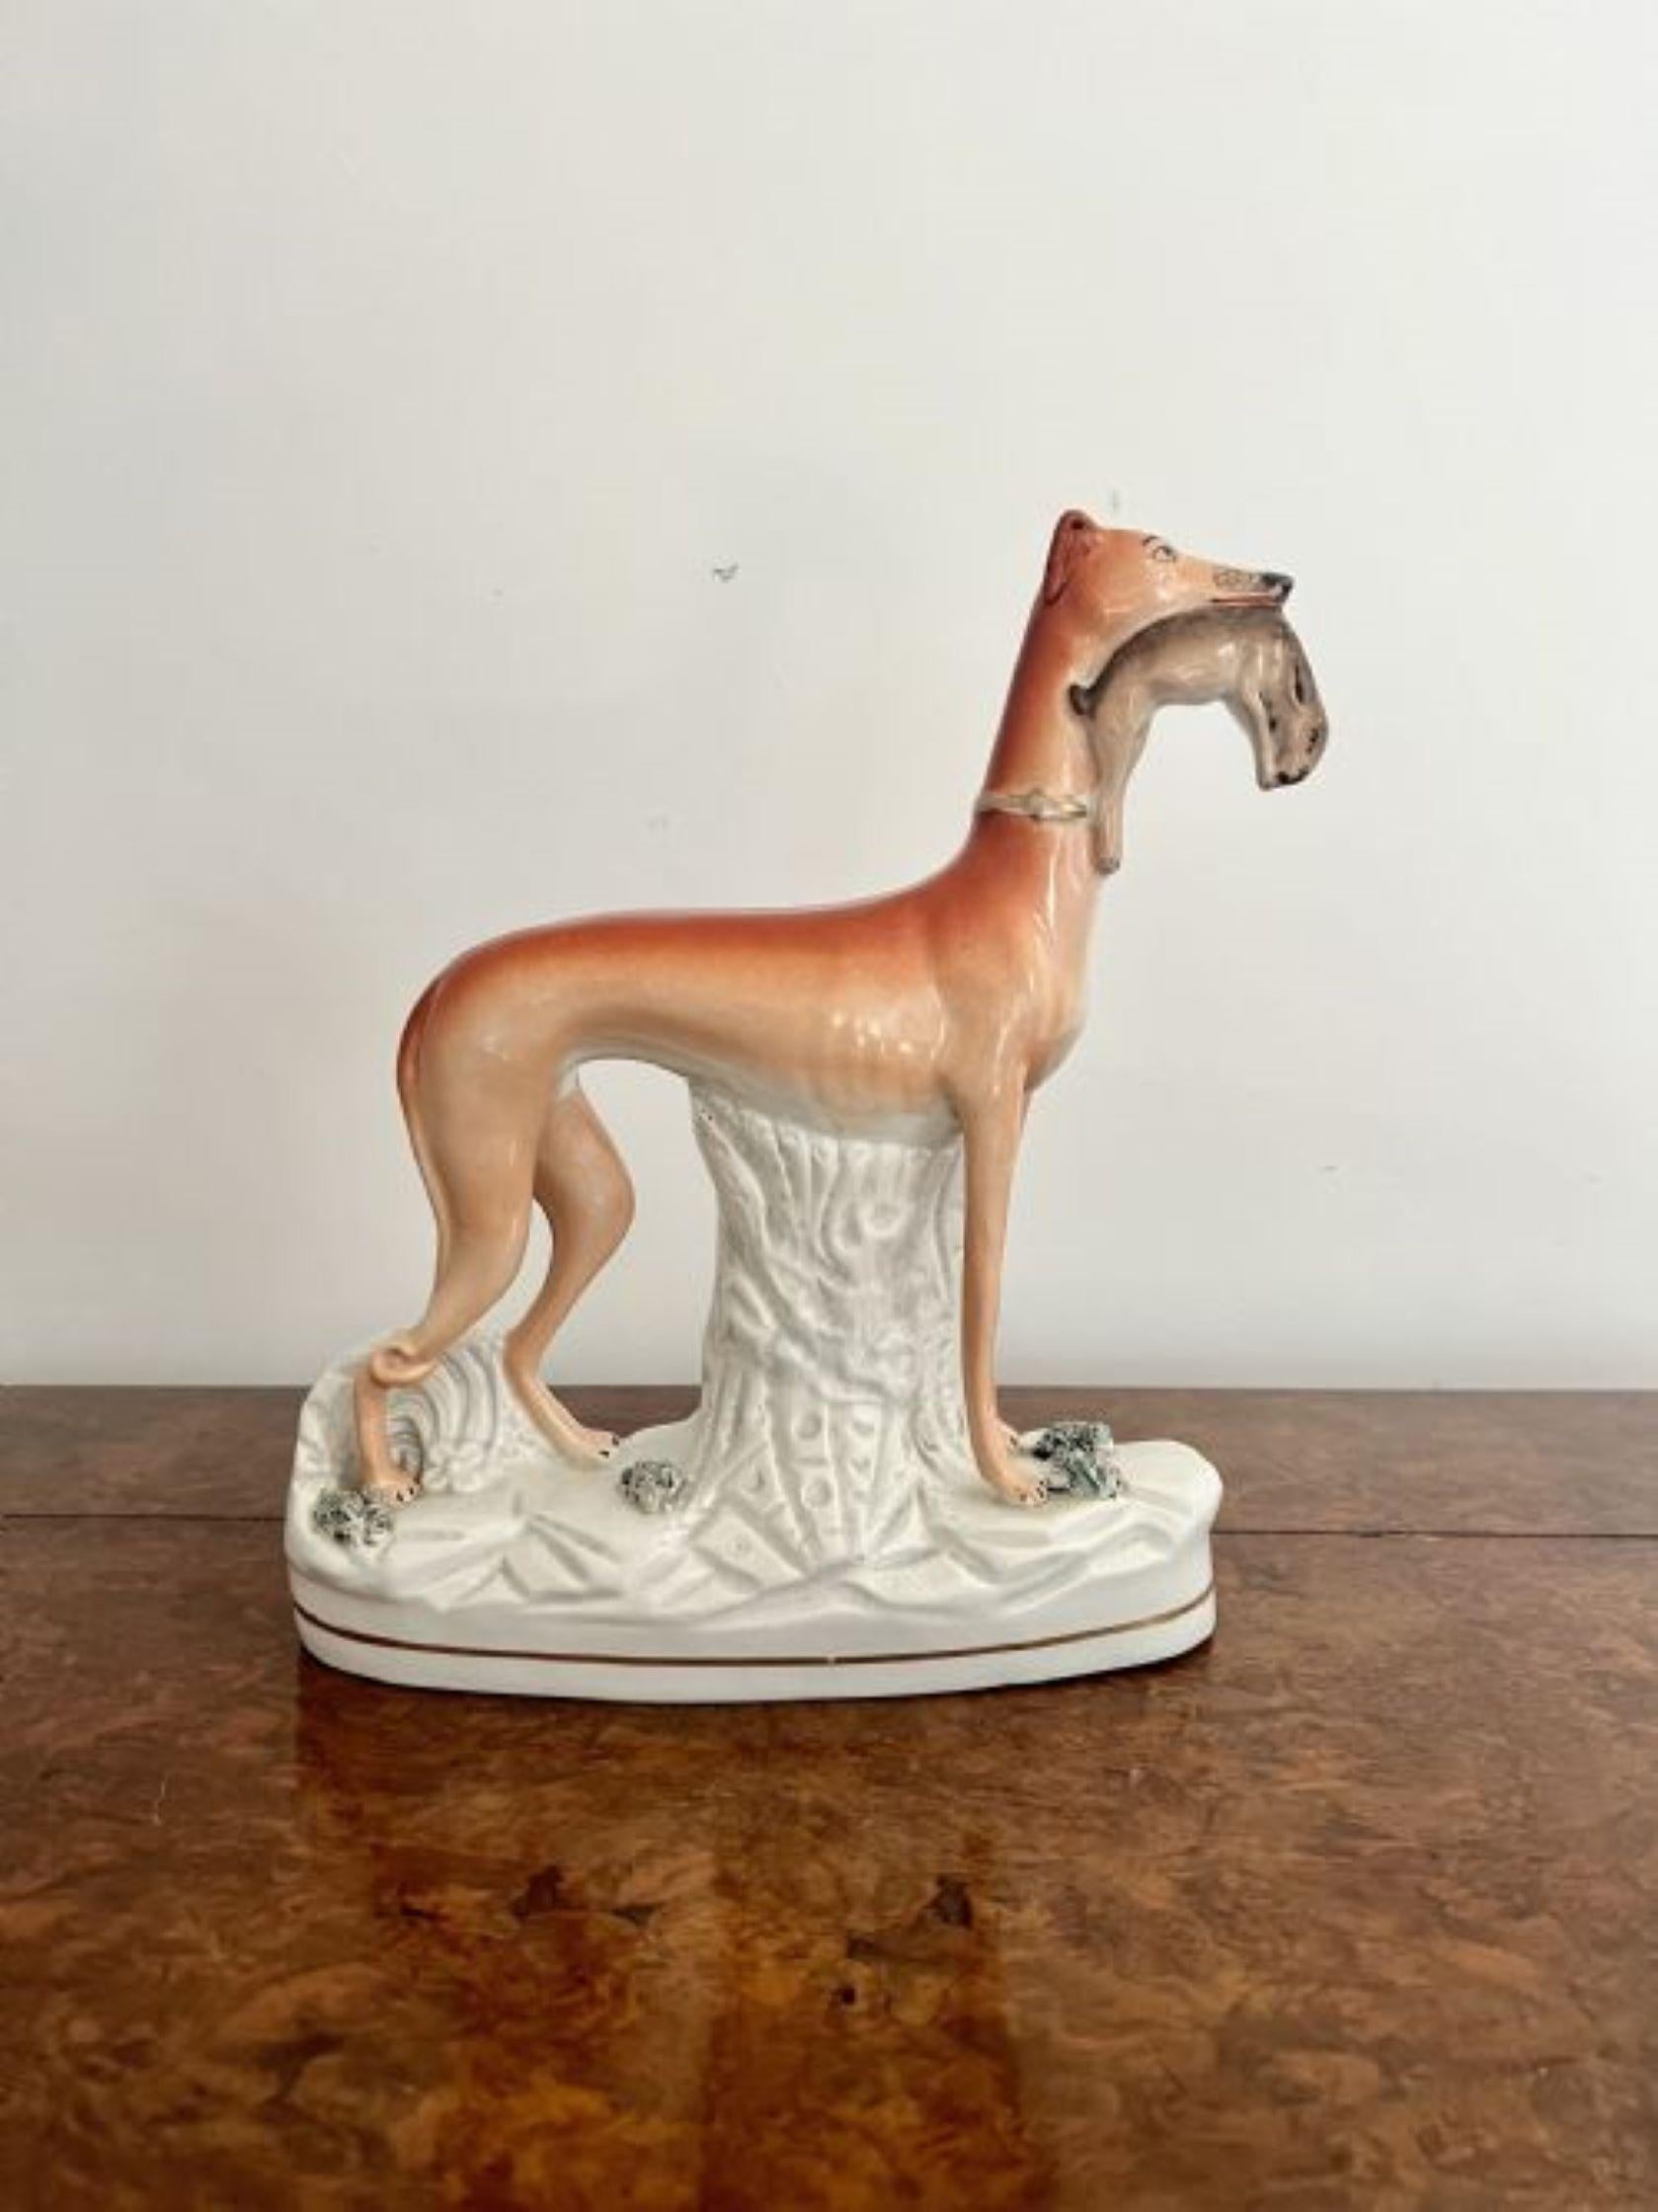 Unusually large antique Victorian staffordshire greyhound figure having an unusually large antique Victorian Staffordshire greyhound figure holding a rabbit in its mouth, hand painted in white and brown colours, standing on an oval gilded shaped